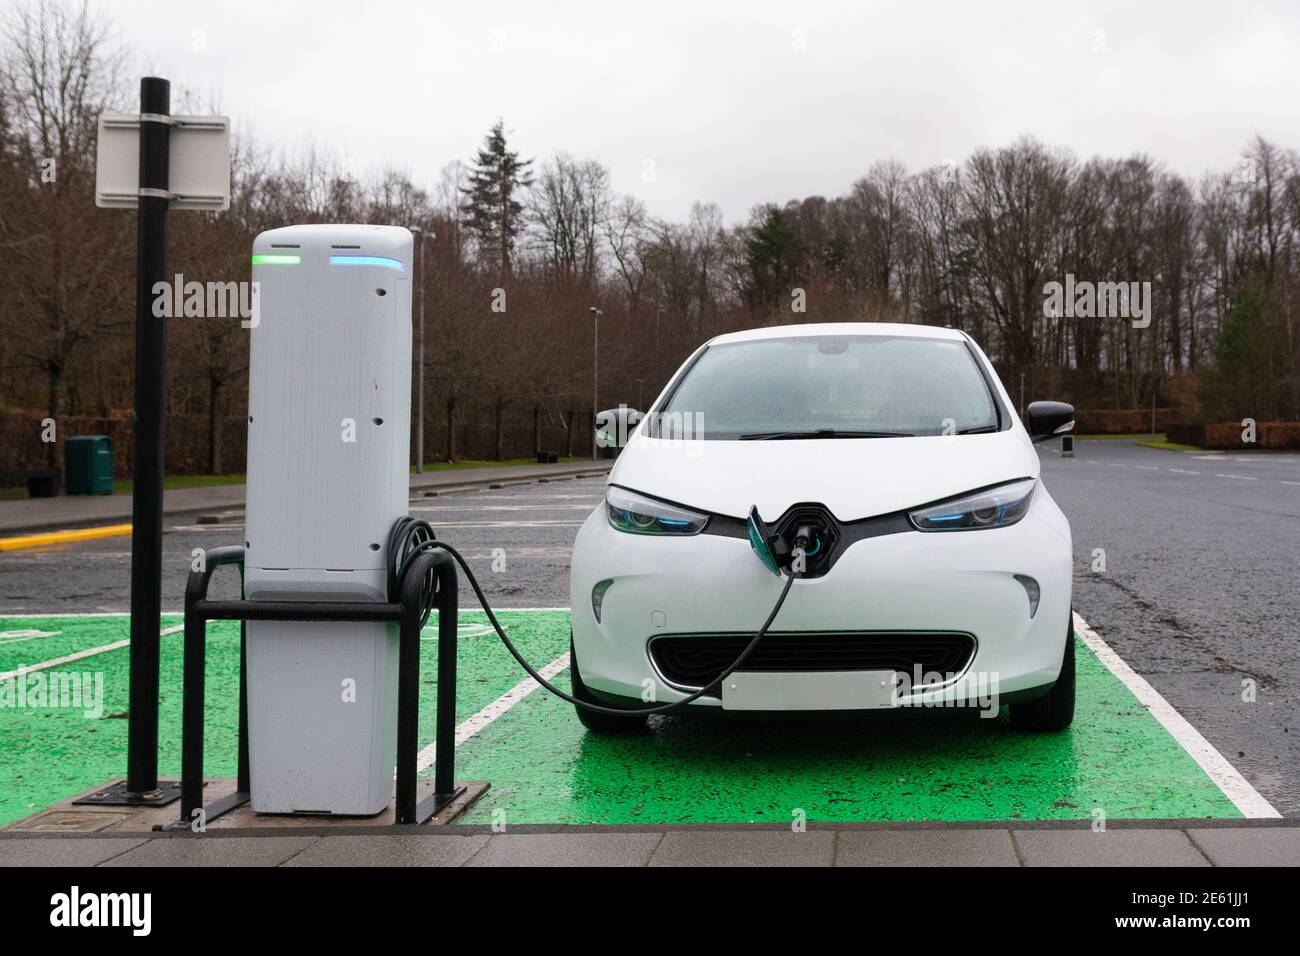 Electric charging scotland High Resolution Stock Photography and Images